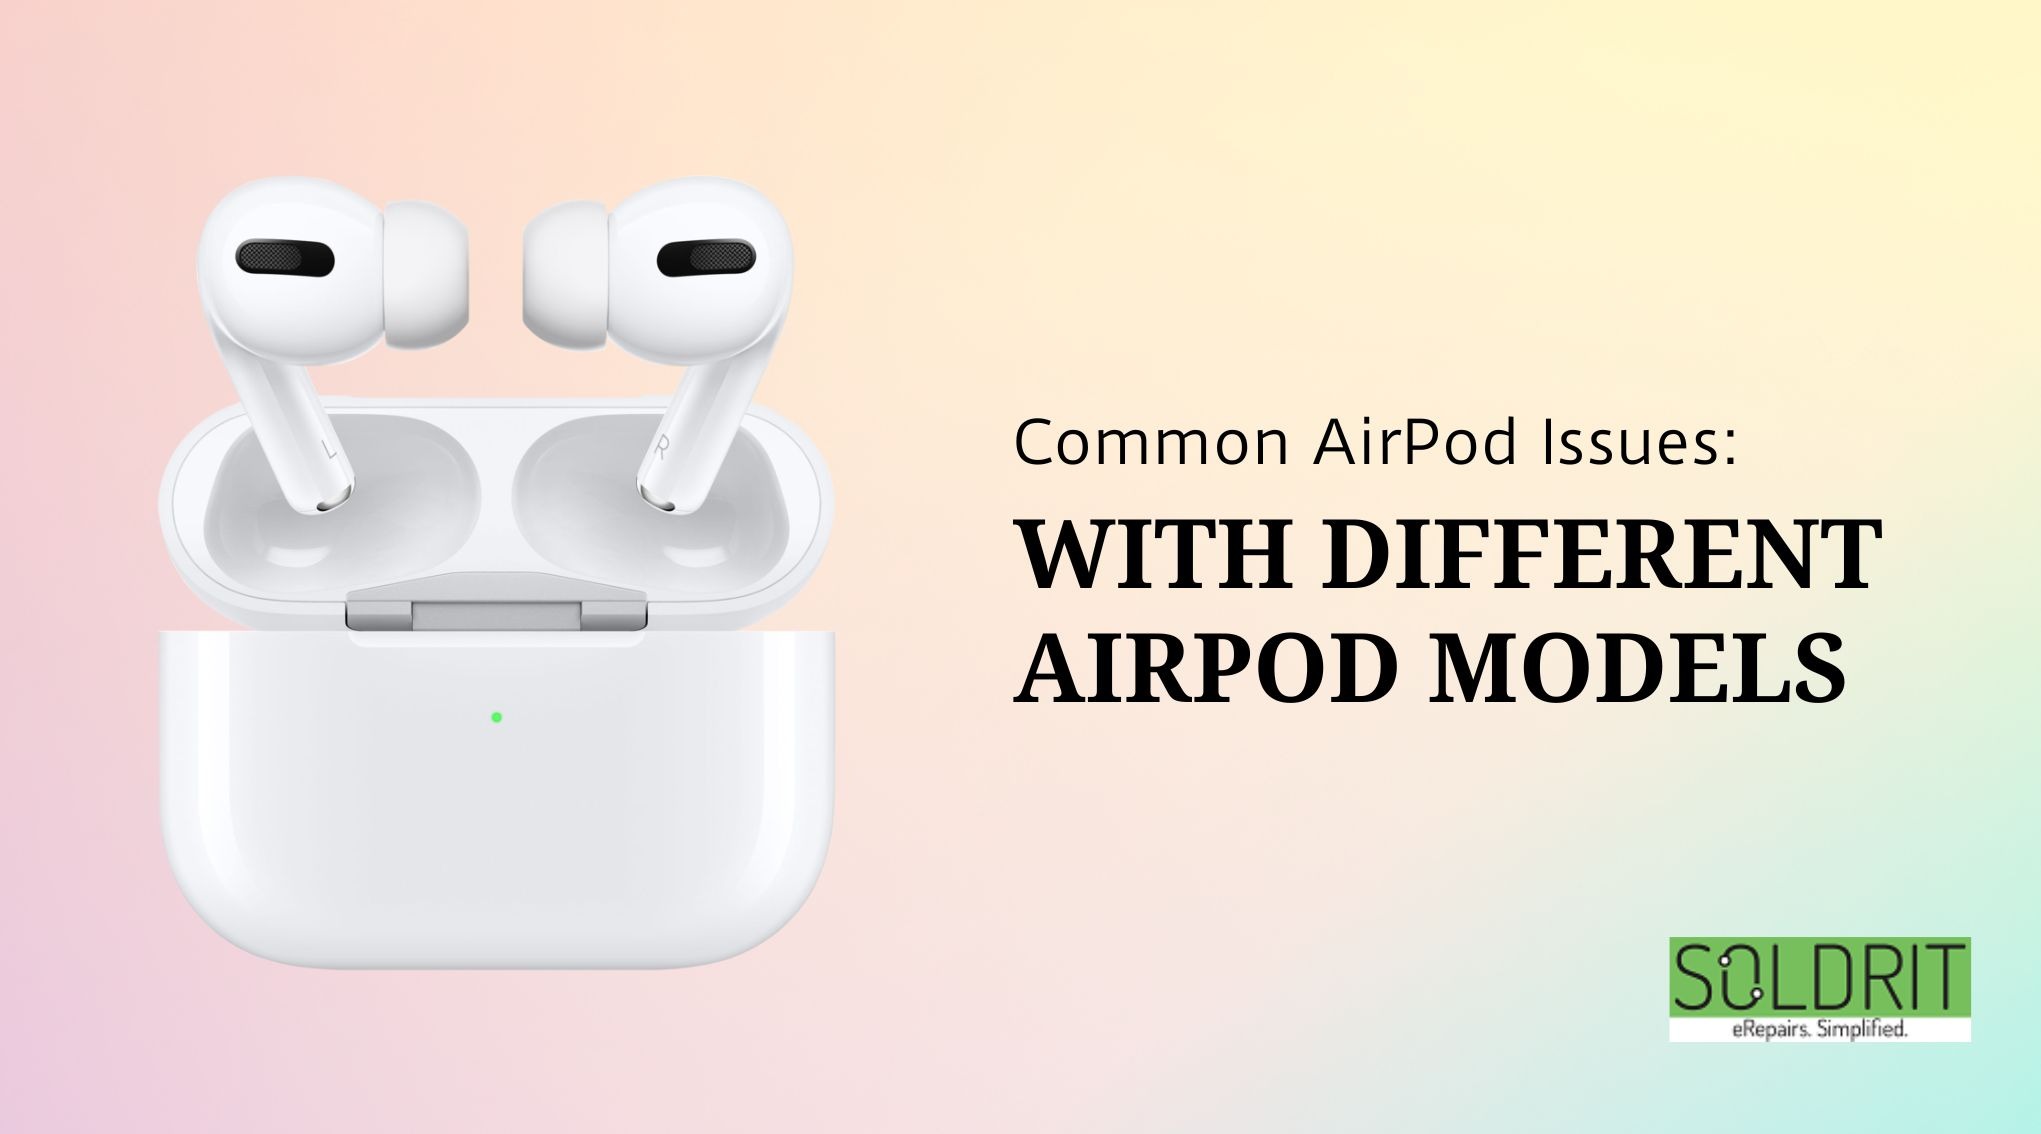 Common AirPod Issues with Different AirPod Models